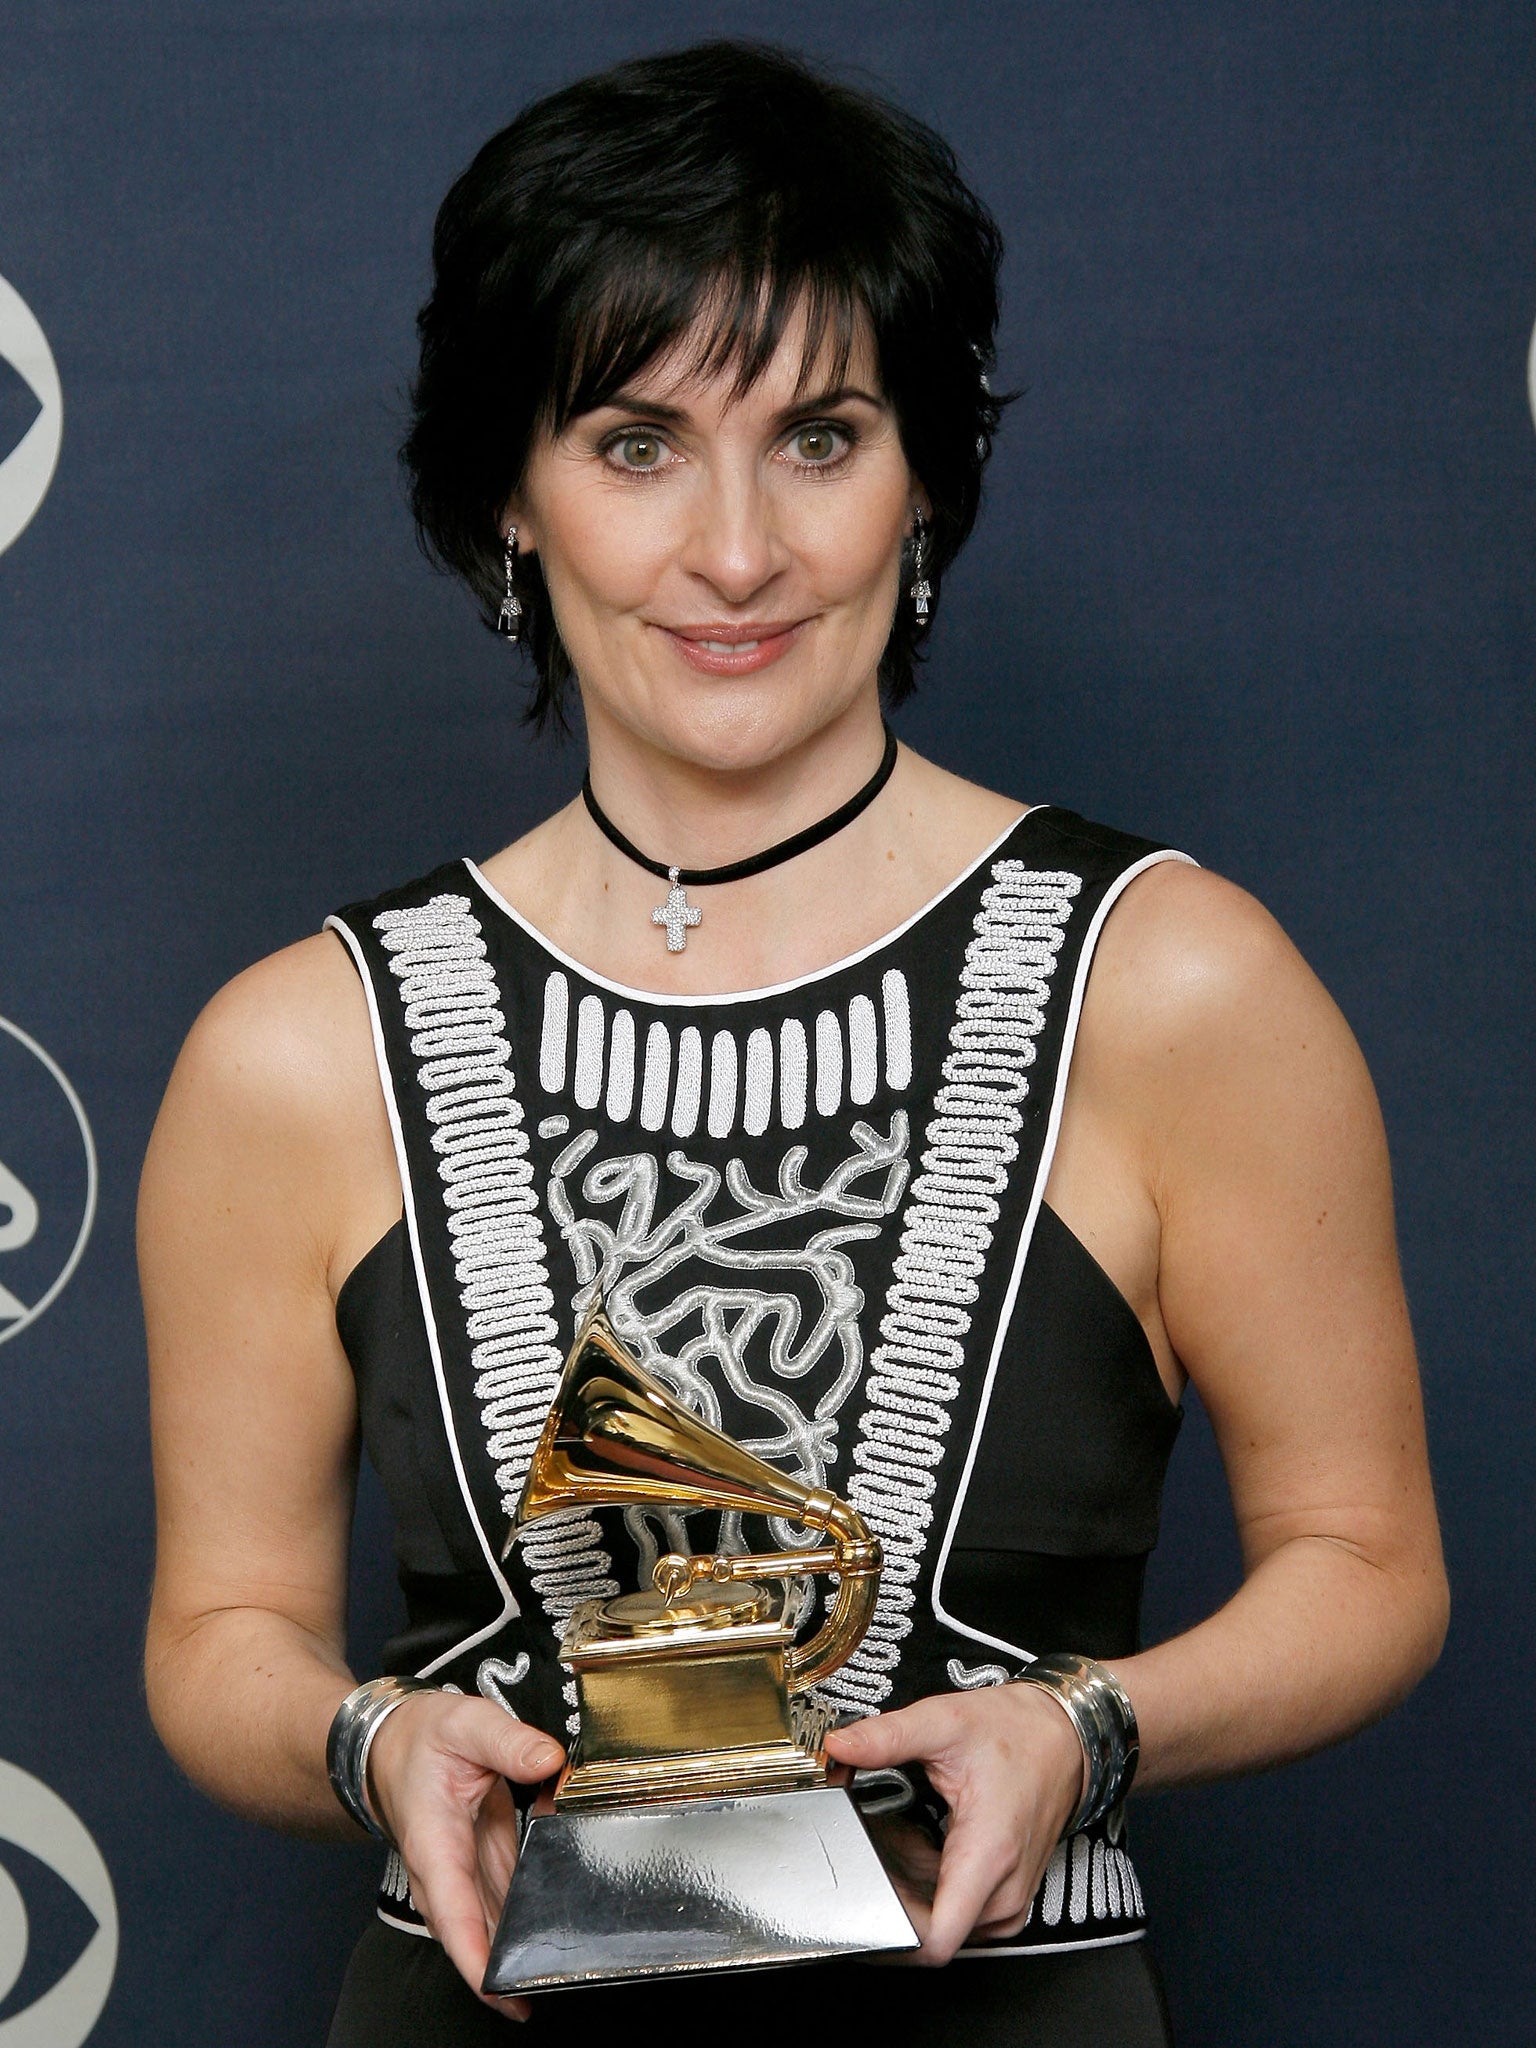 Enya interview: Ireland's most successful solo artist on being